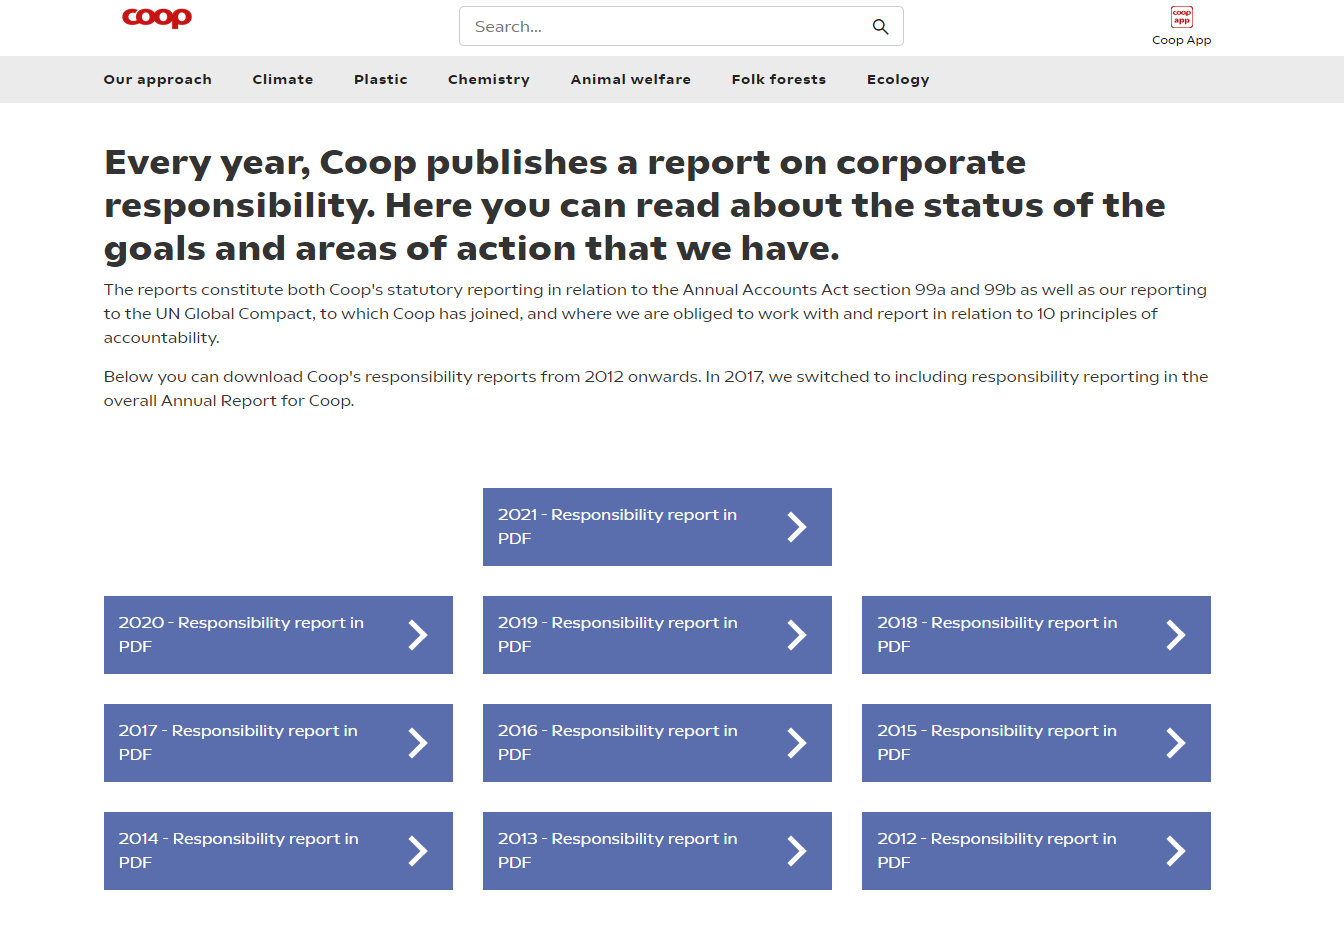 Coop´s sustainability reports